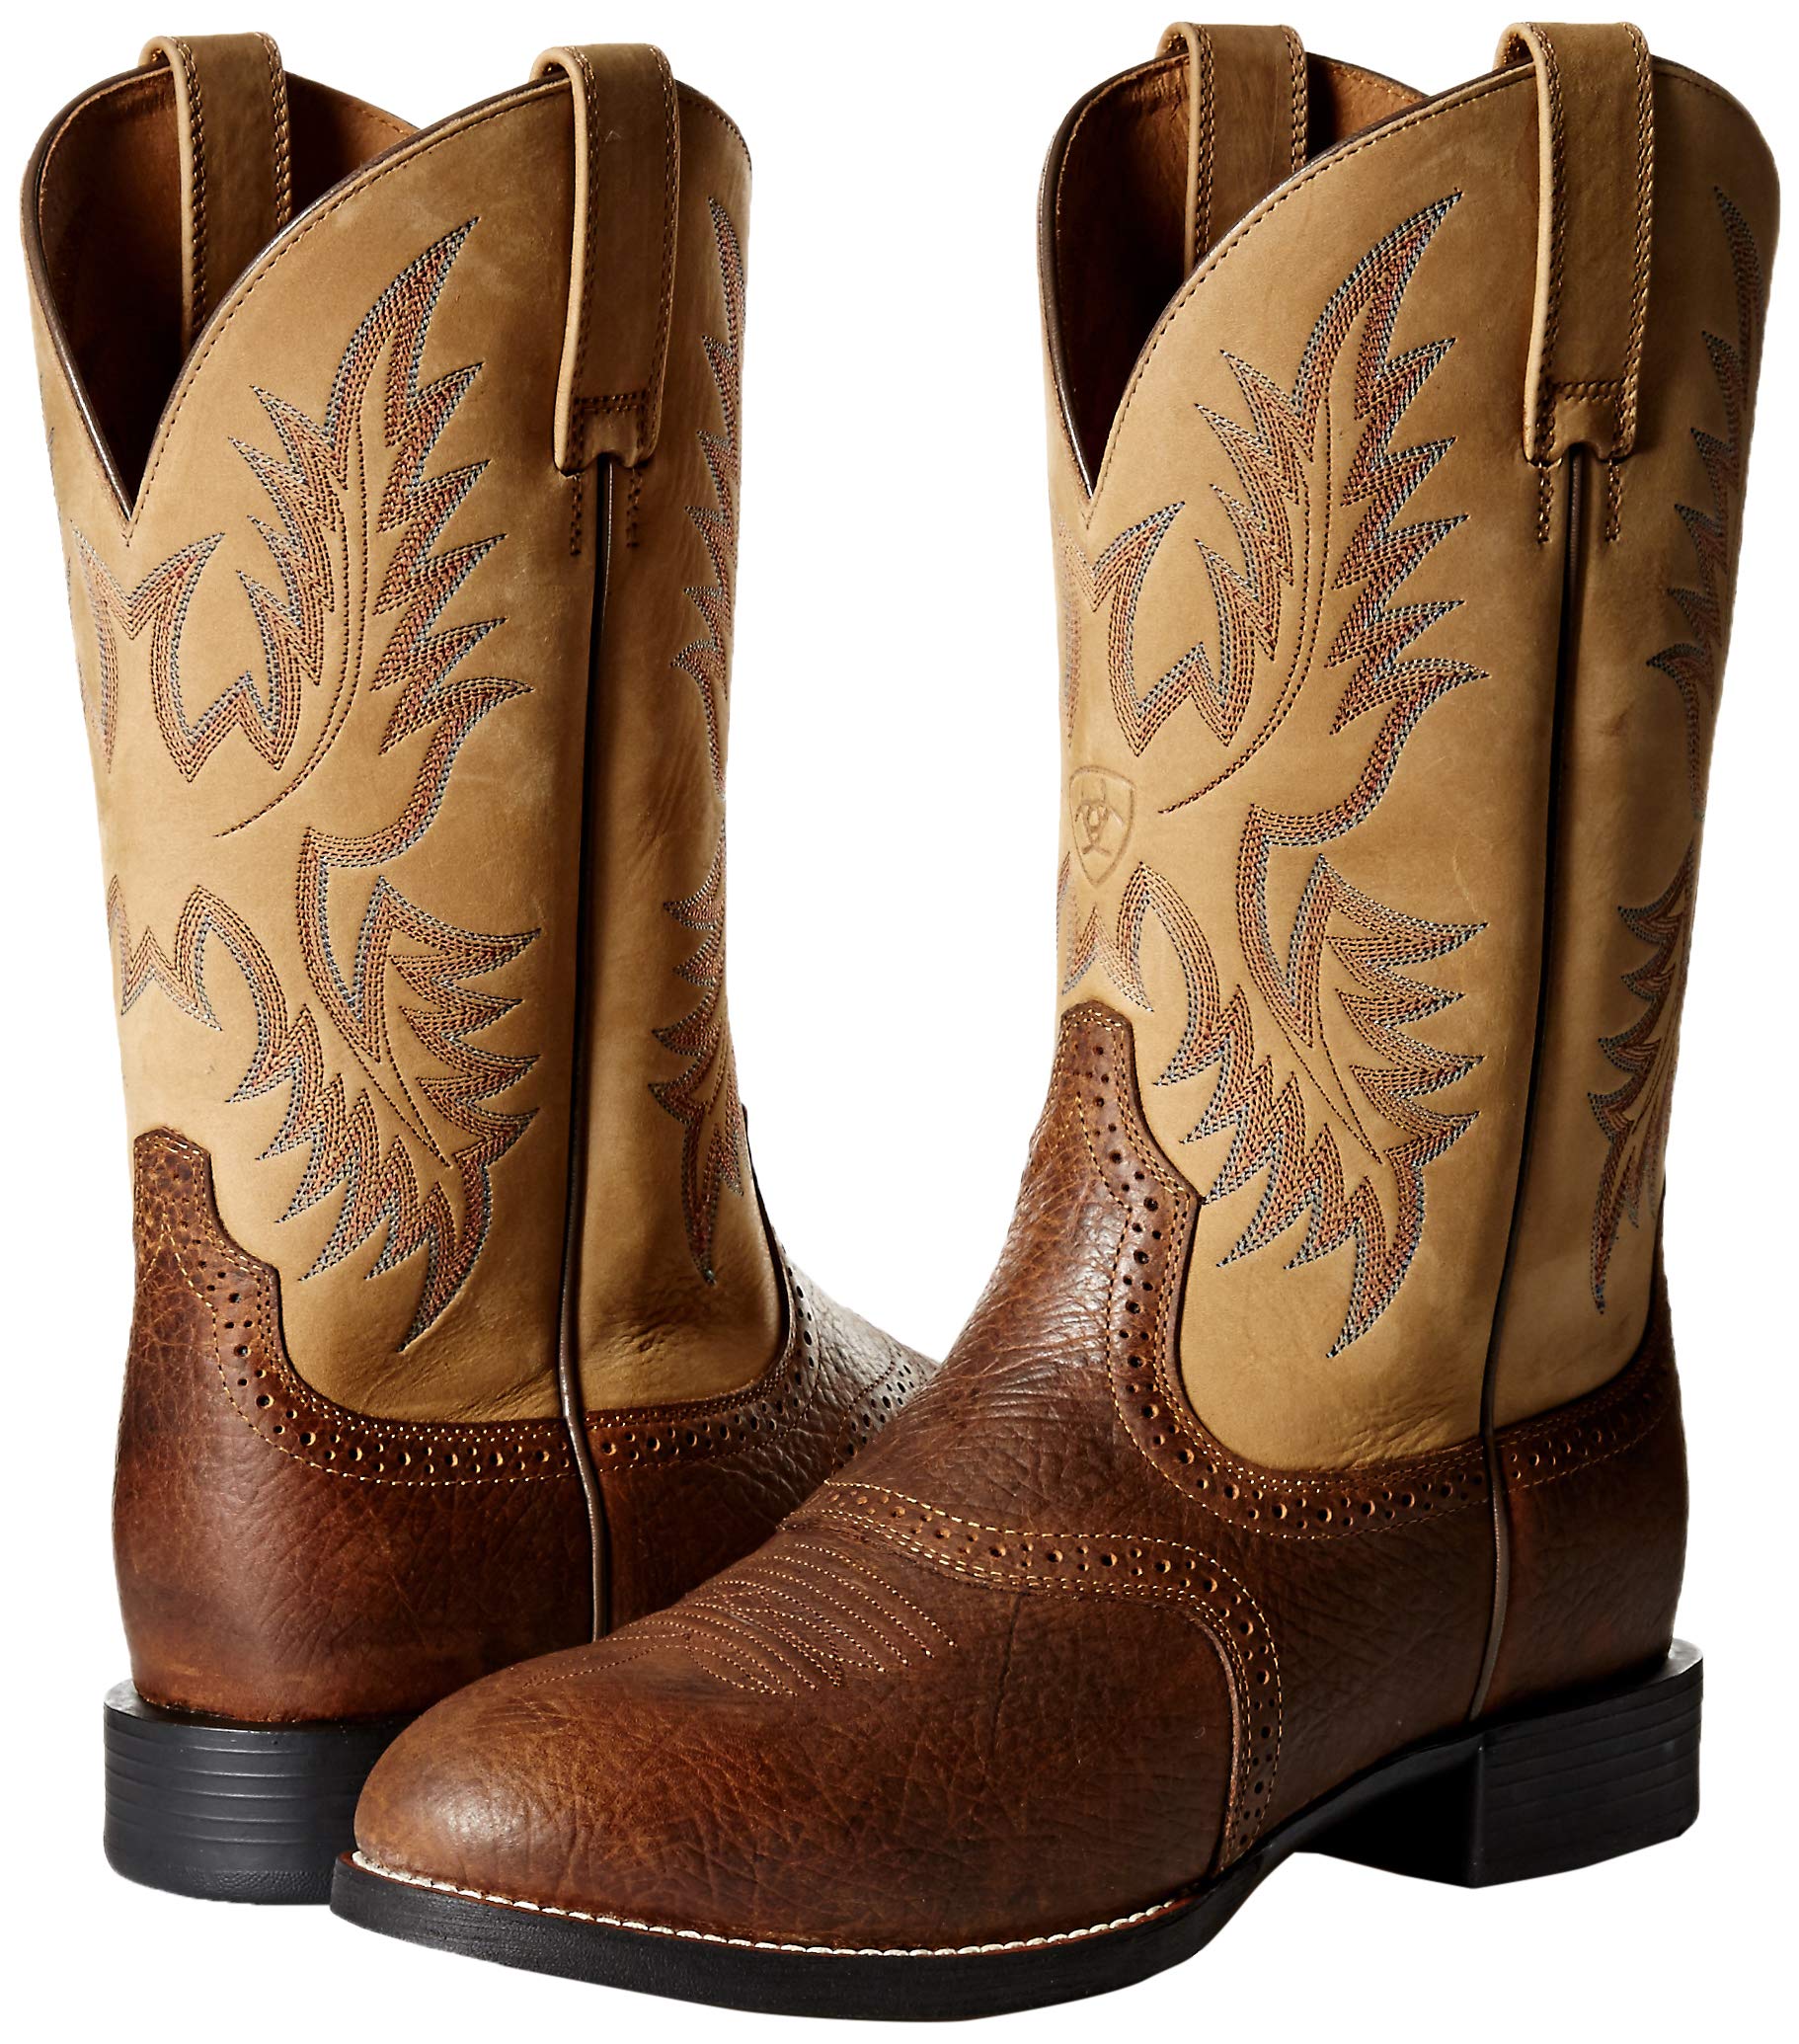 Ariat Heritage Stockman Western Boot - Men's Round Toe Leather Boots